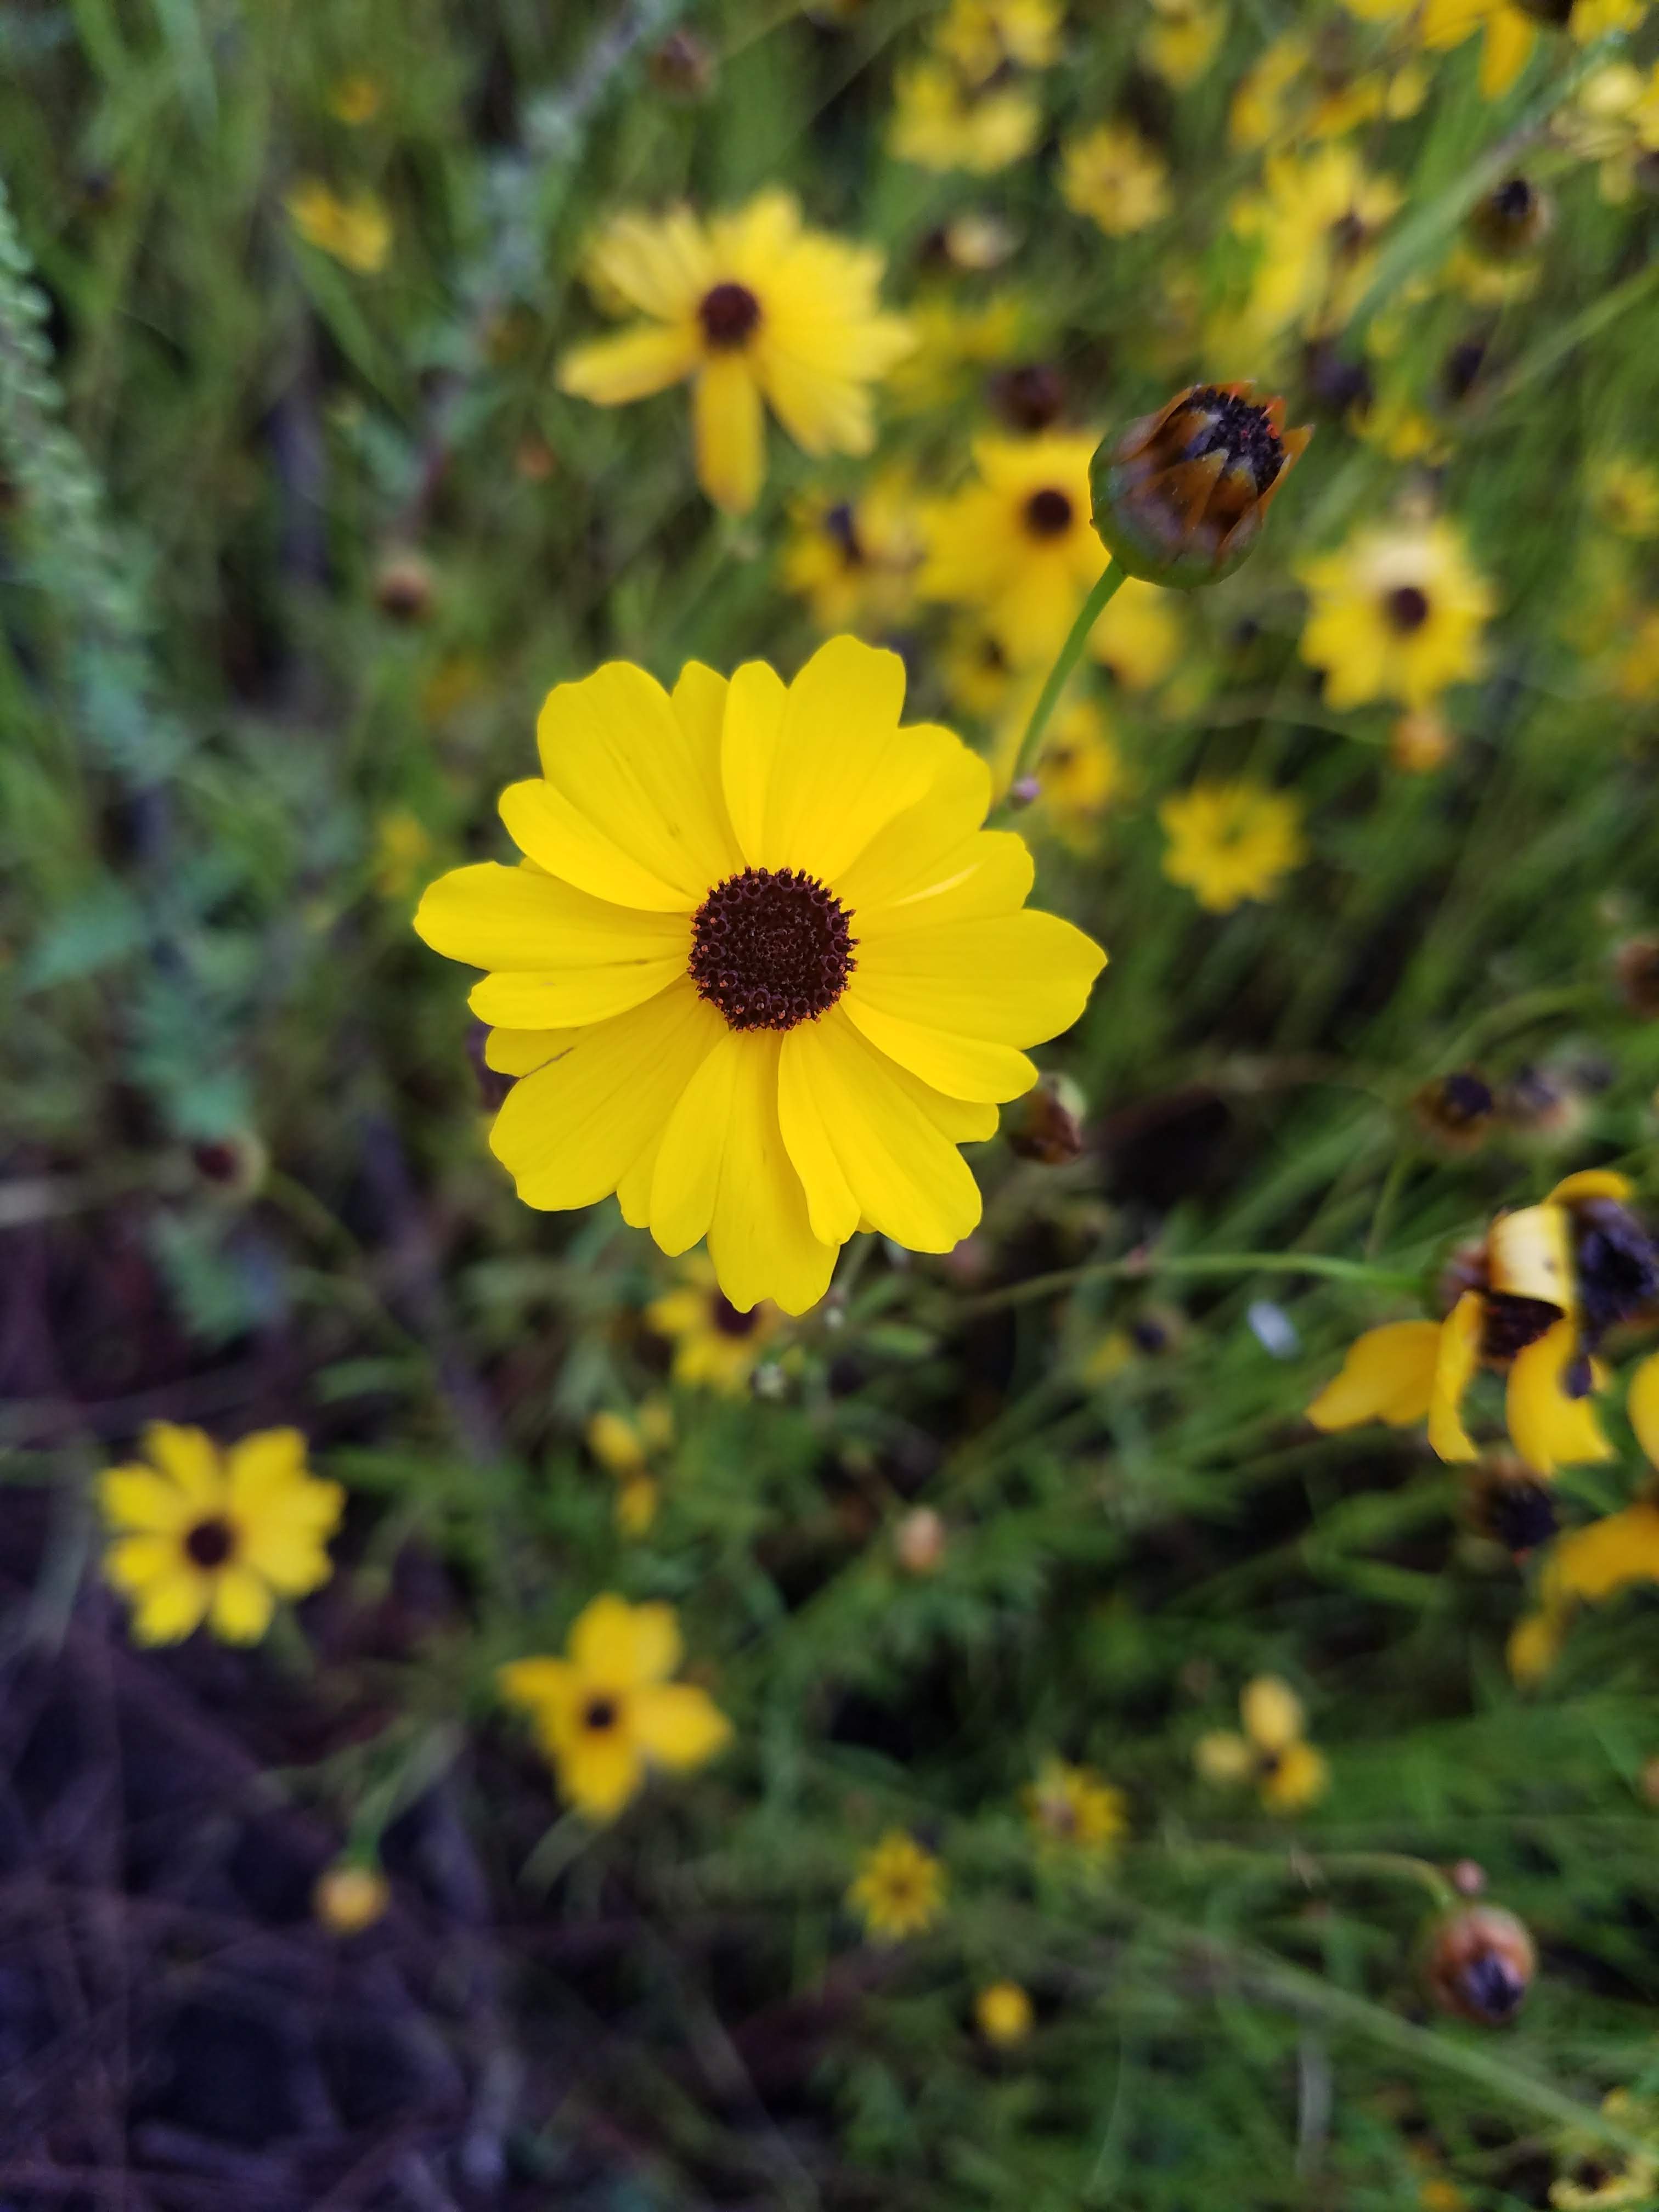 A close-up of a coreopsis flower